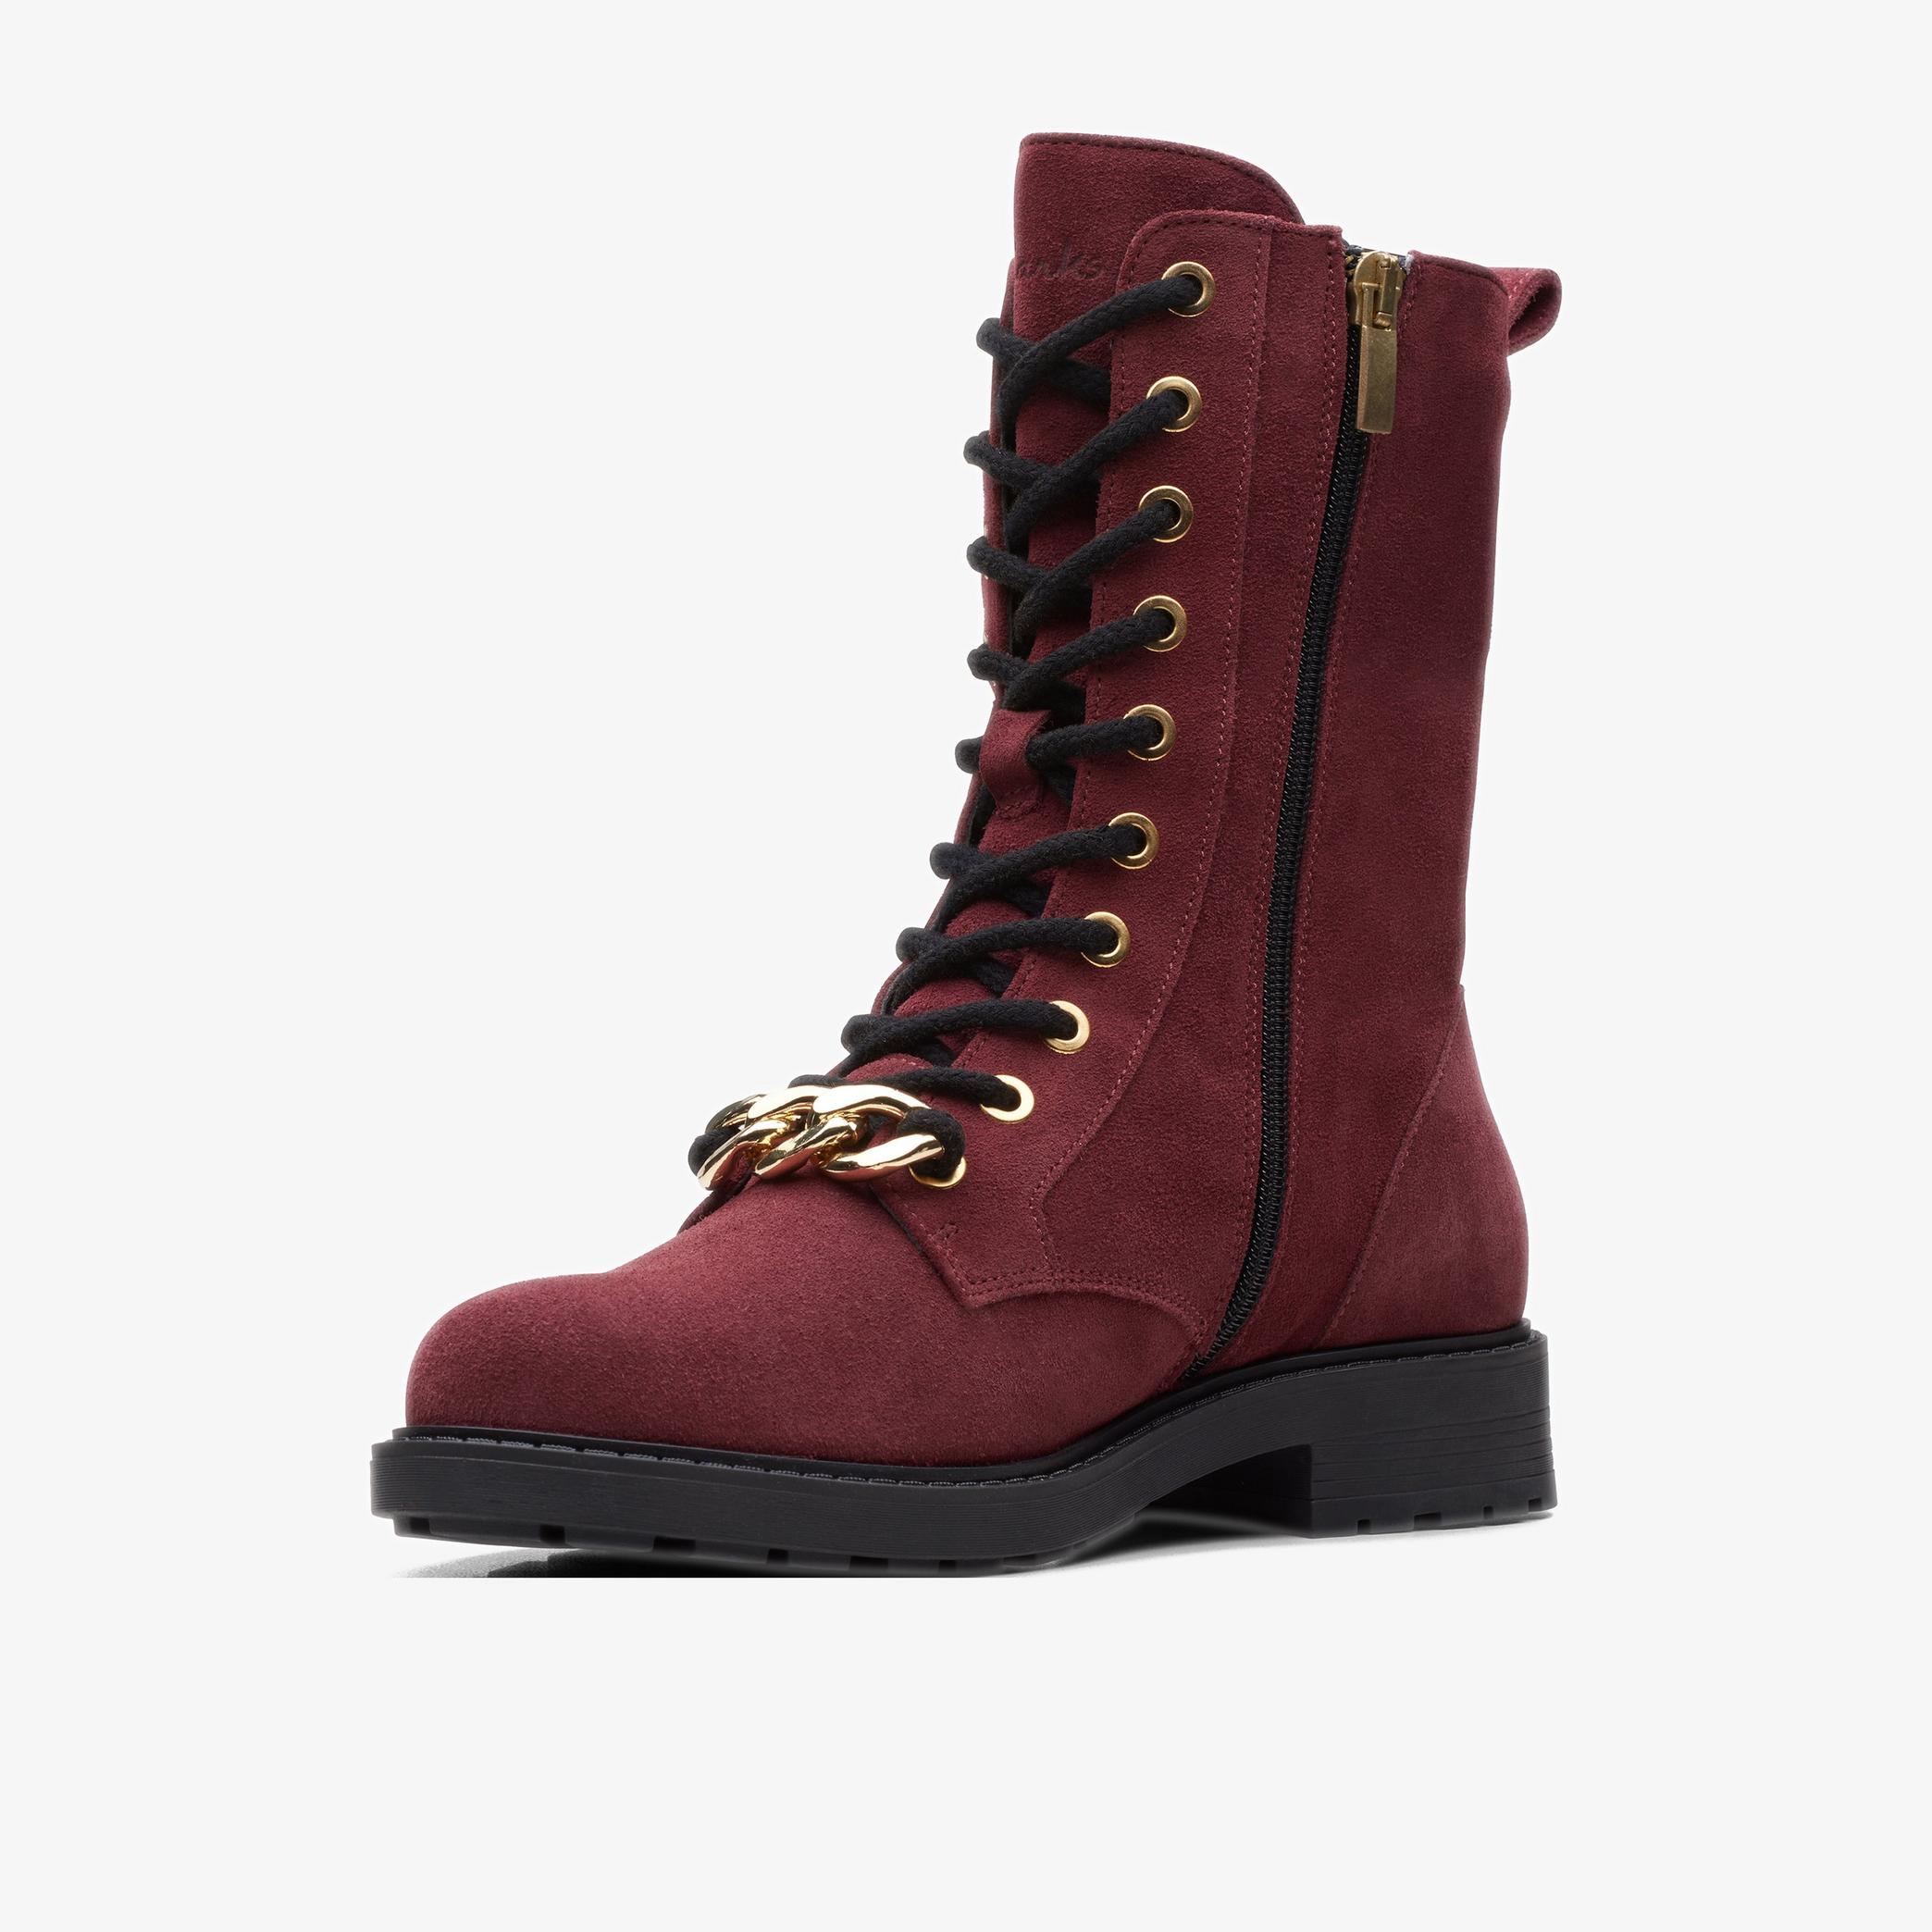 Orinoco2 Style Merlot Suede Ankle Boots, view 4 of 6